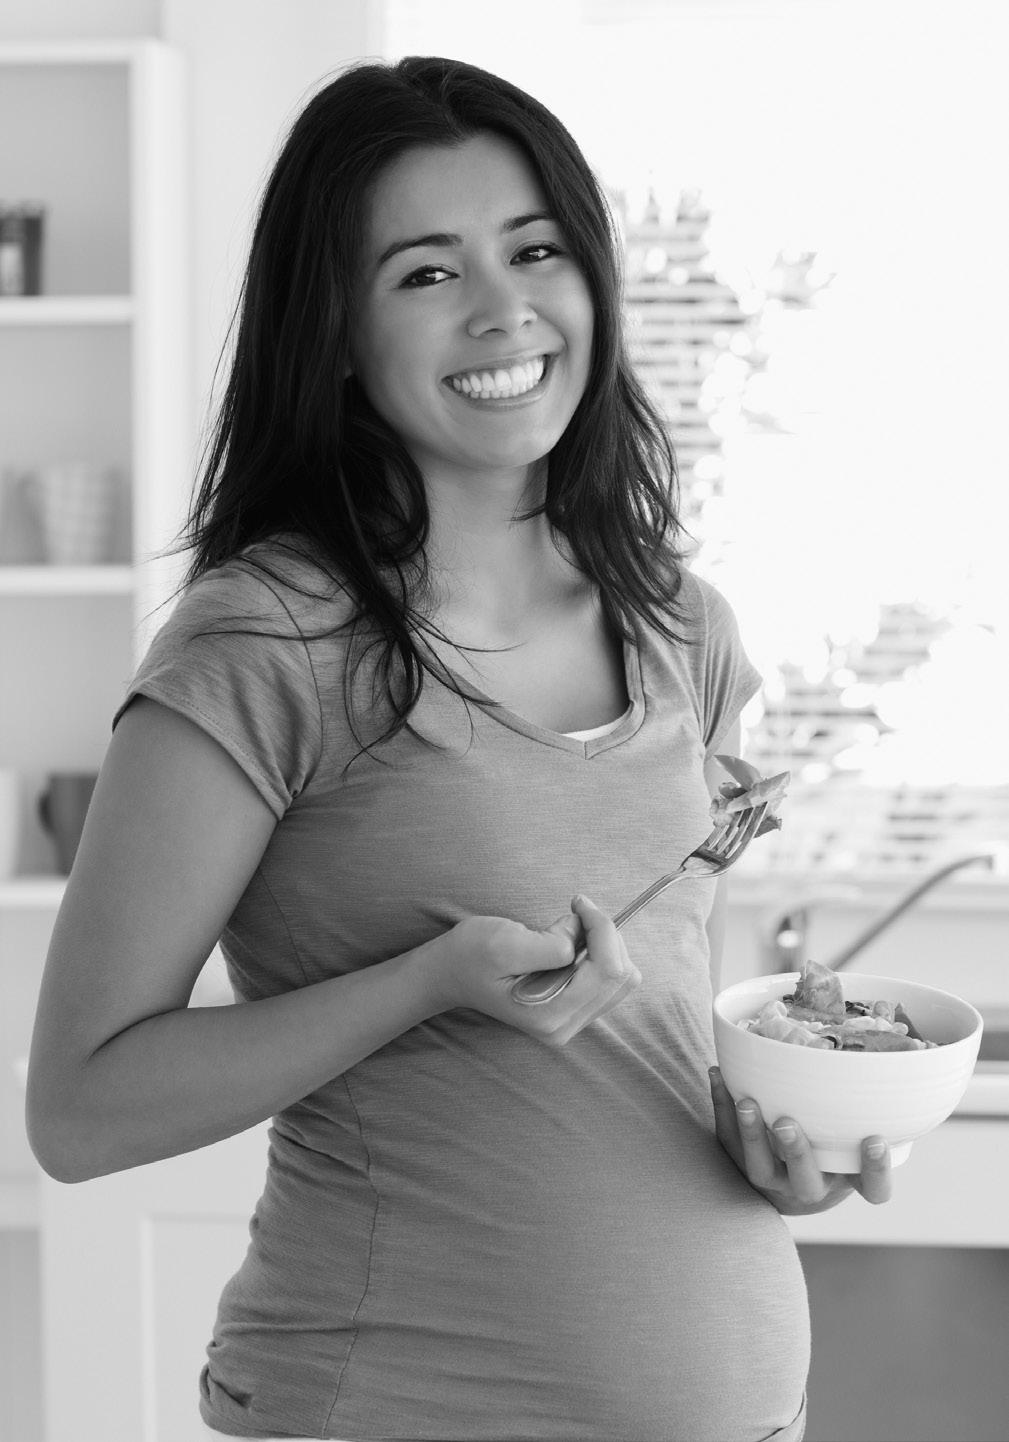 Prenatal Care Management Program At no additional cost, our Prenatal Care Management Program helps expectant mothers have a healthy pregnancy and deliver healthy babies.